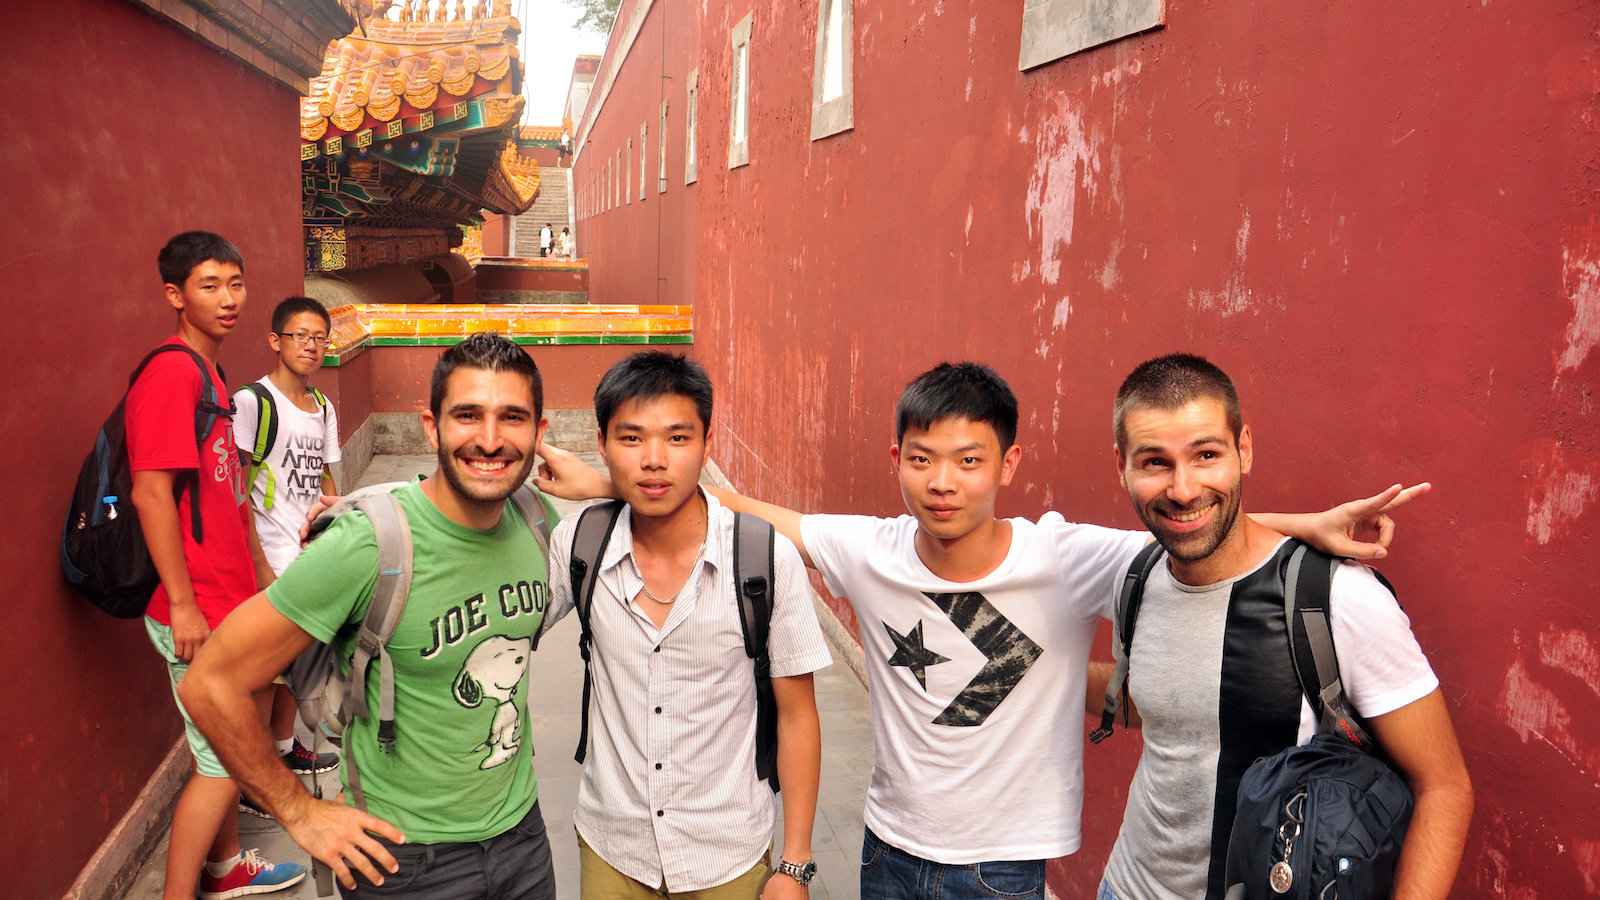 Locals in Beijing love meeting foreigners and there is a gay scene